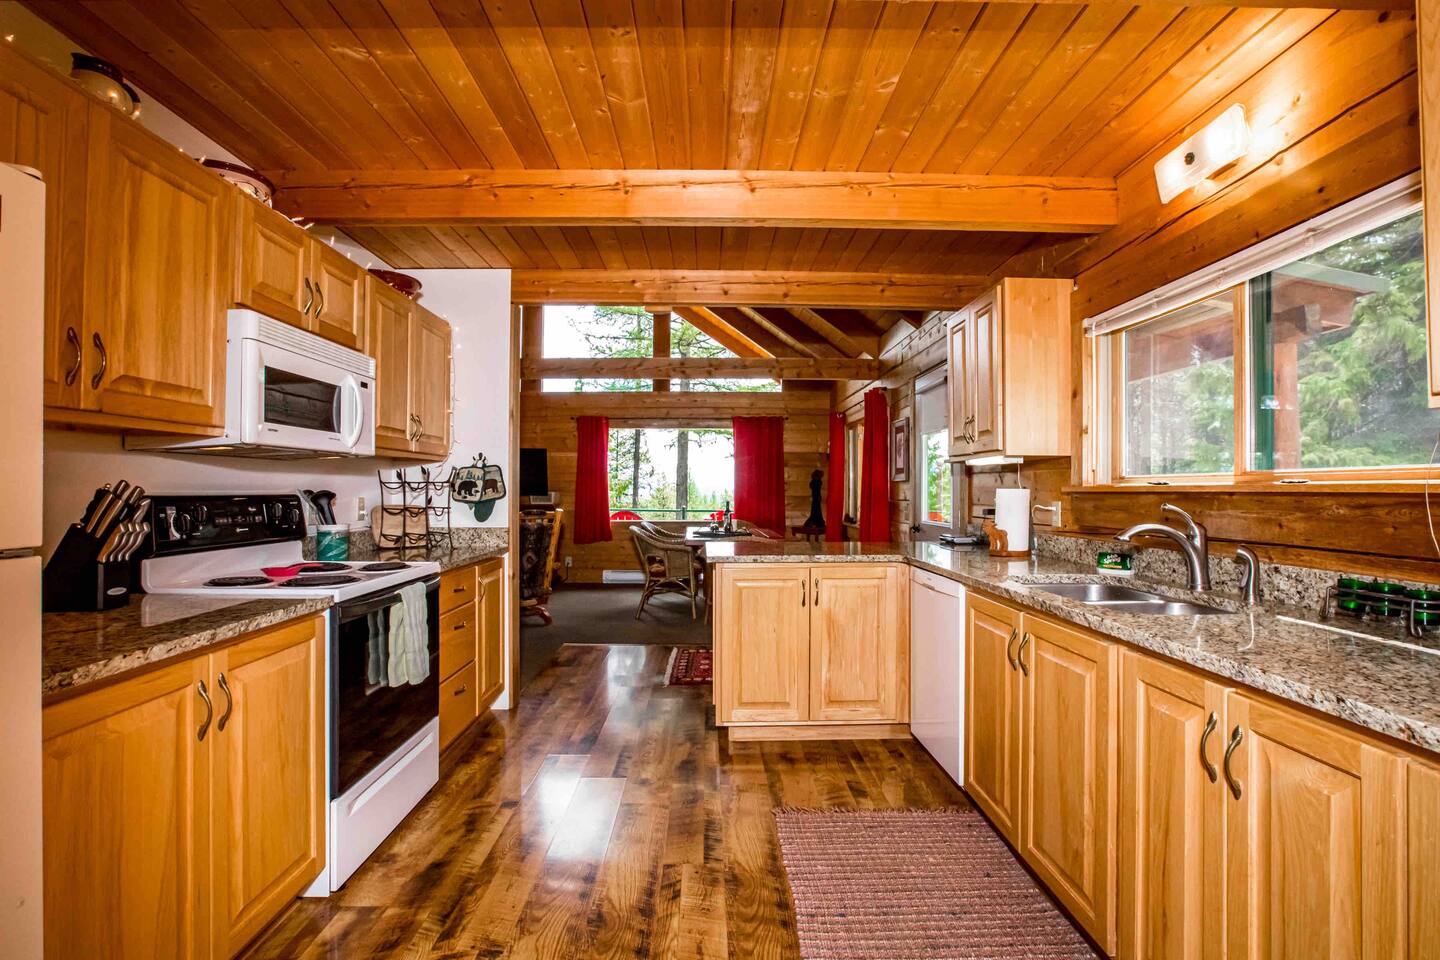 Kitchen made of wood with sink near large window